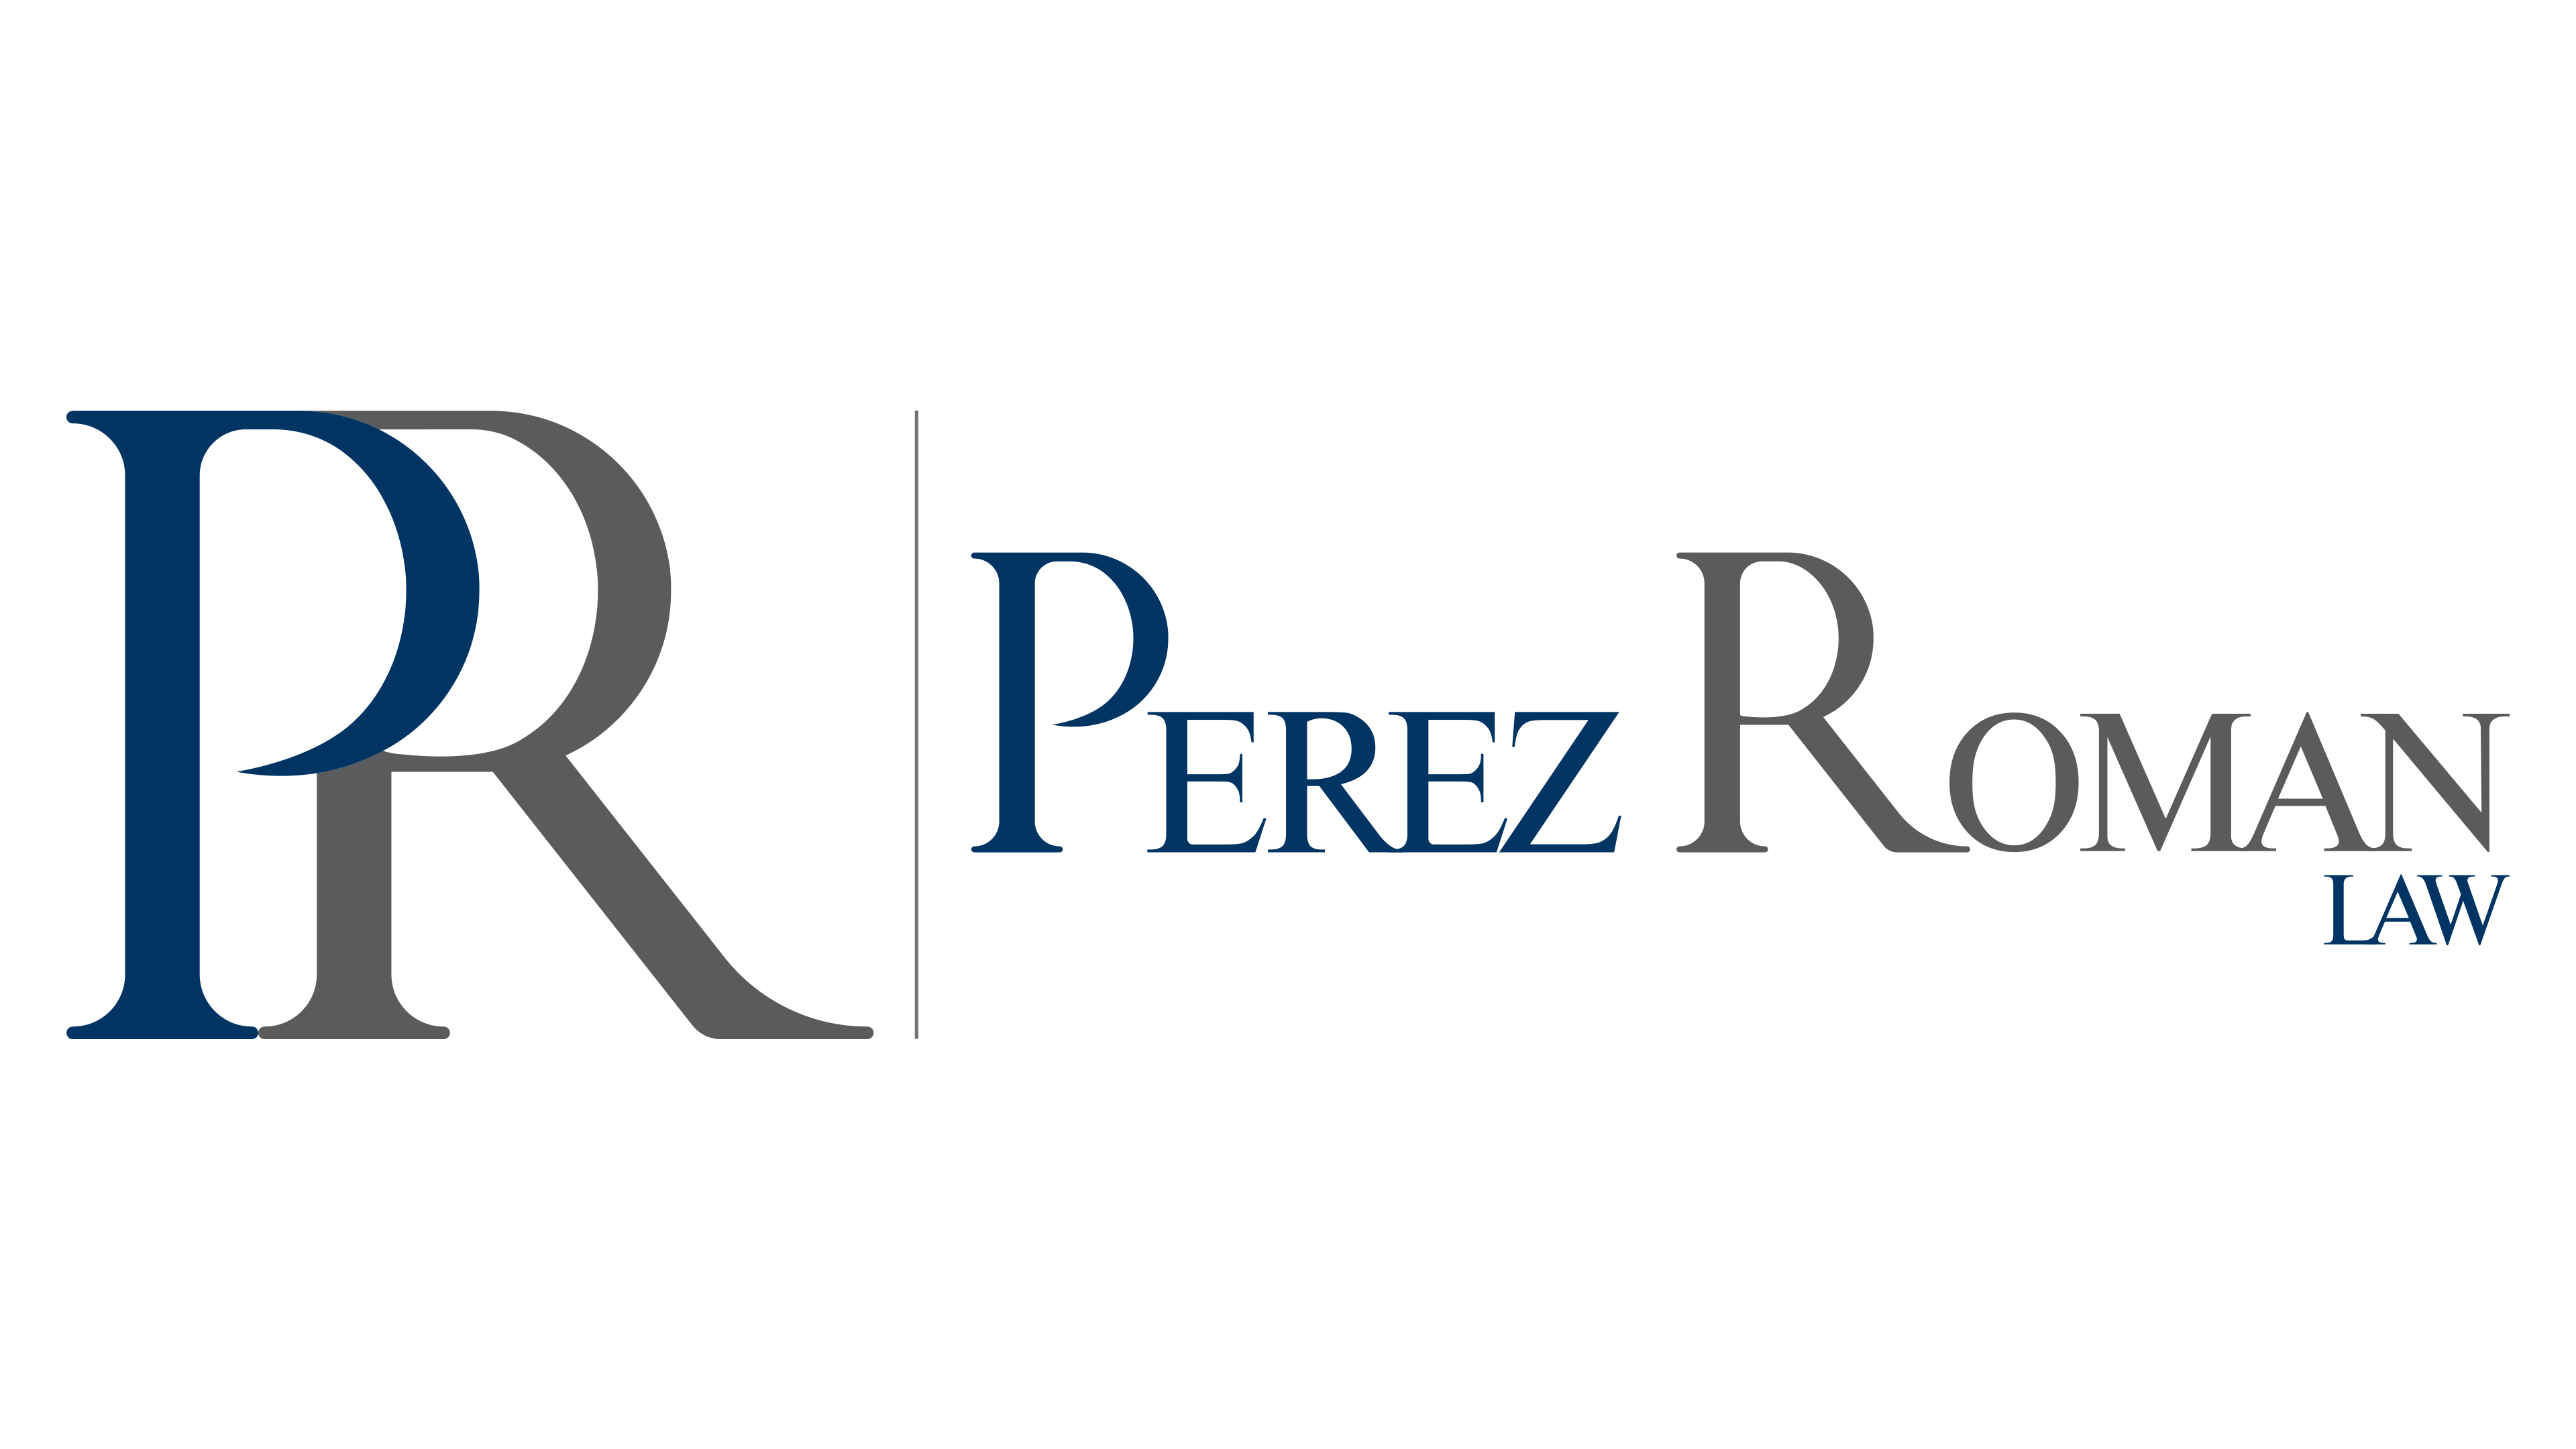 Best of Doral™ Attorneys introduces Perez Roman Law.